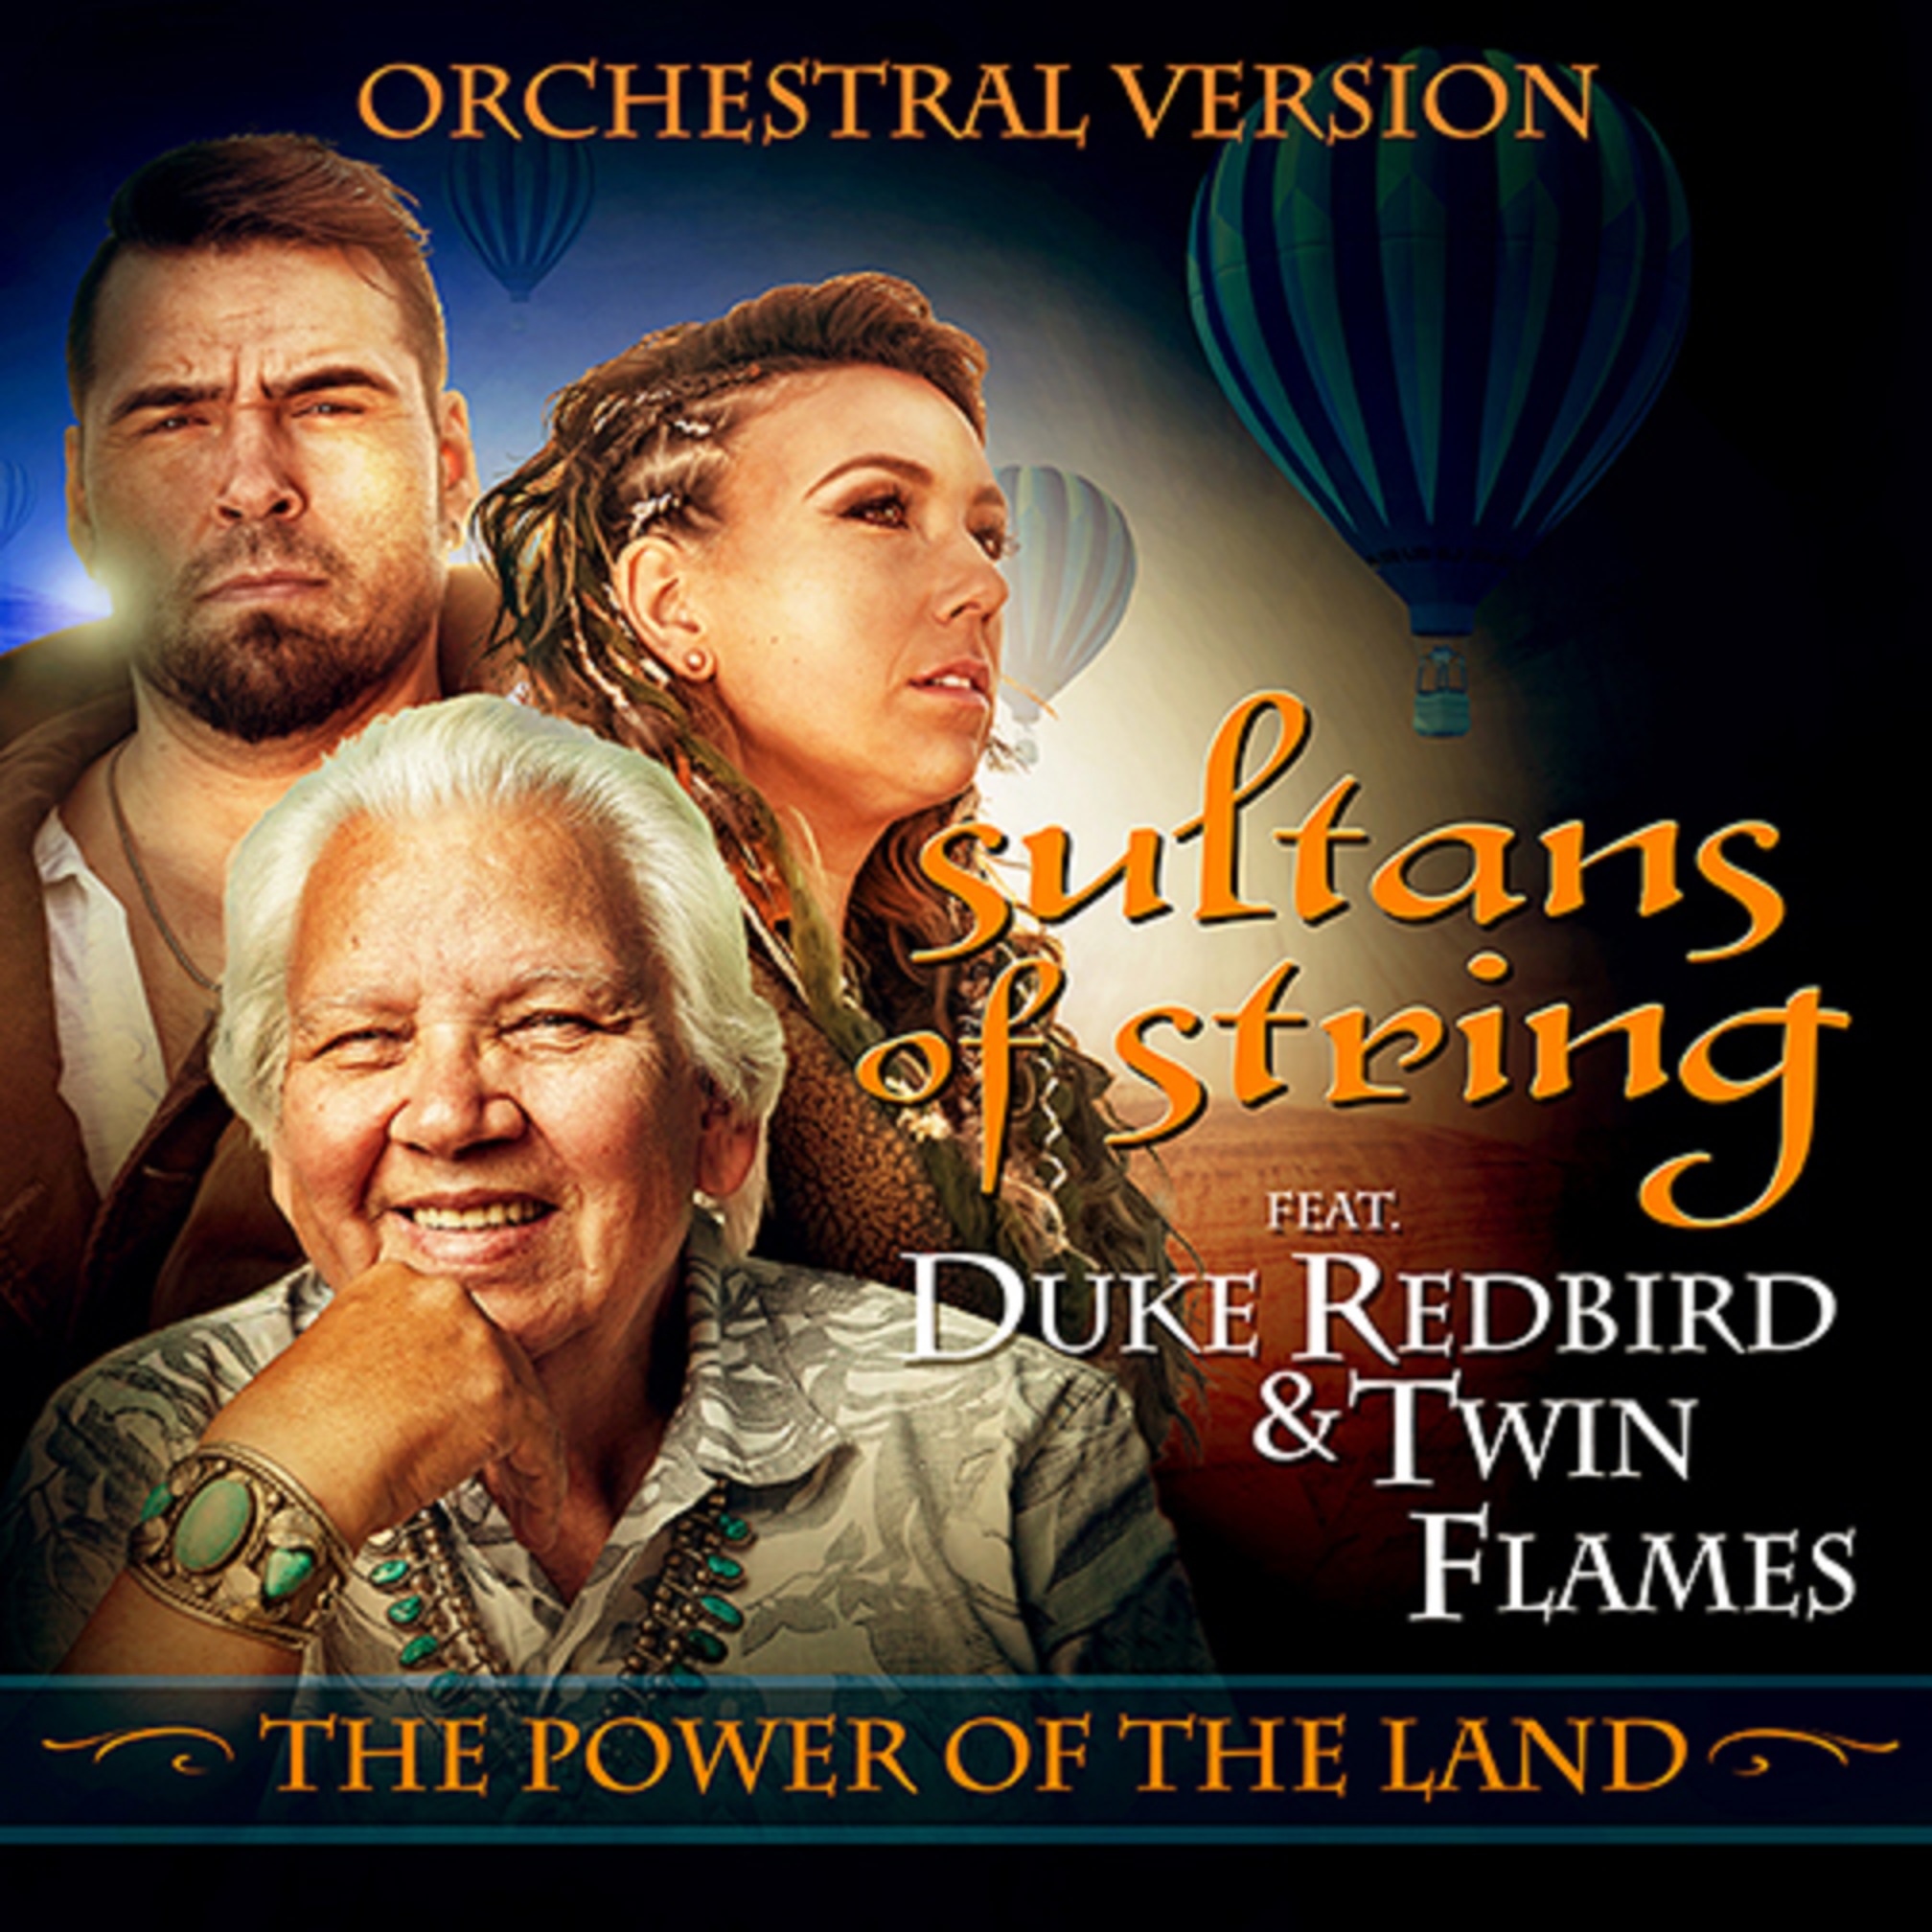 Sultans of String Release “The Power of the Land” feat. Duke Redbird & Twin Flames